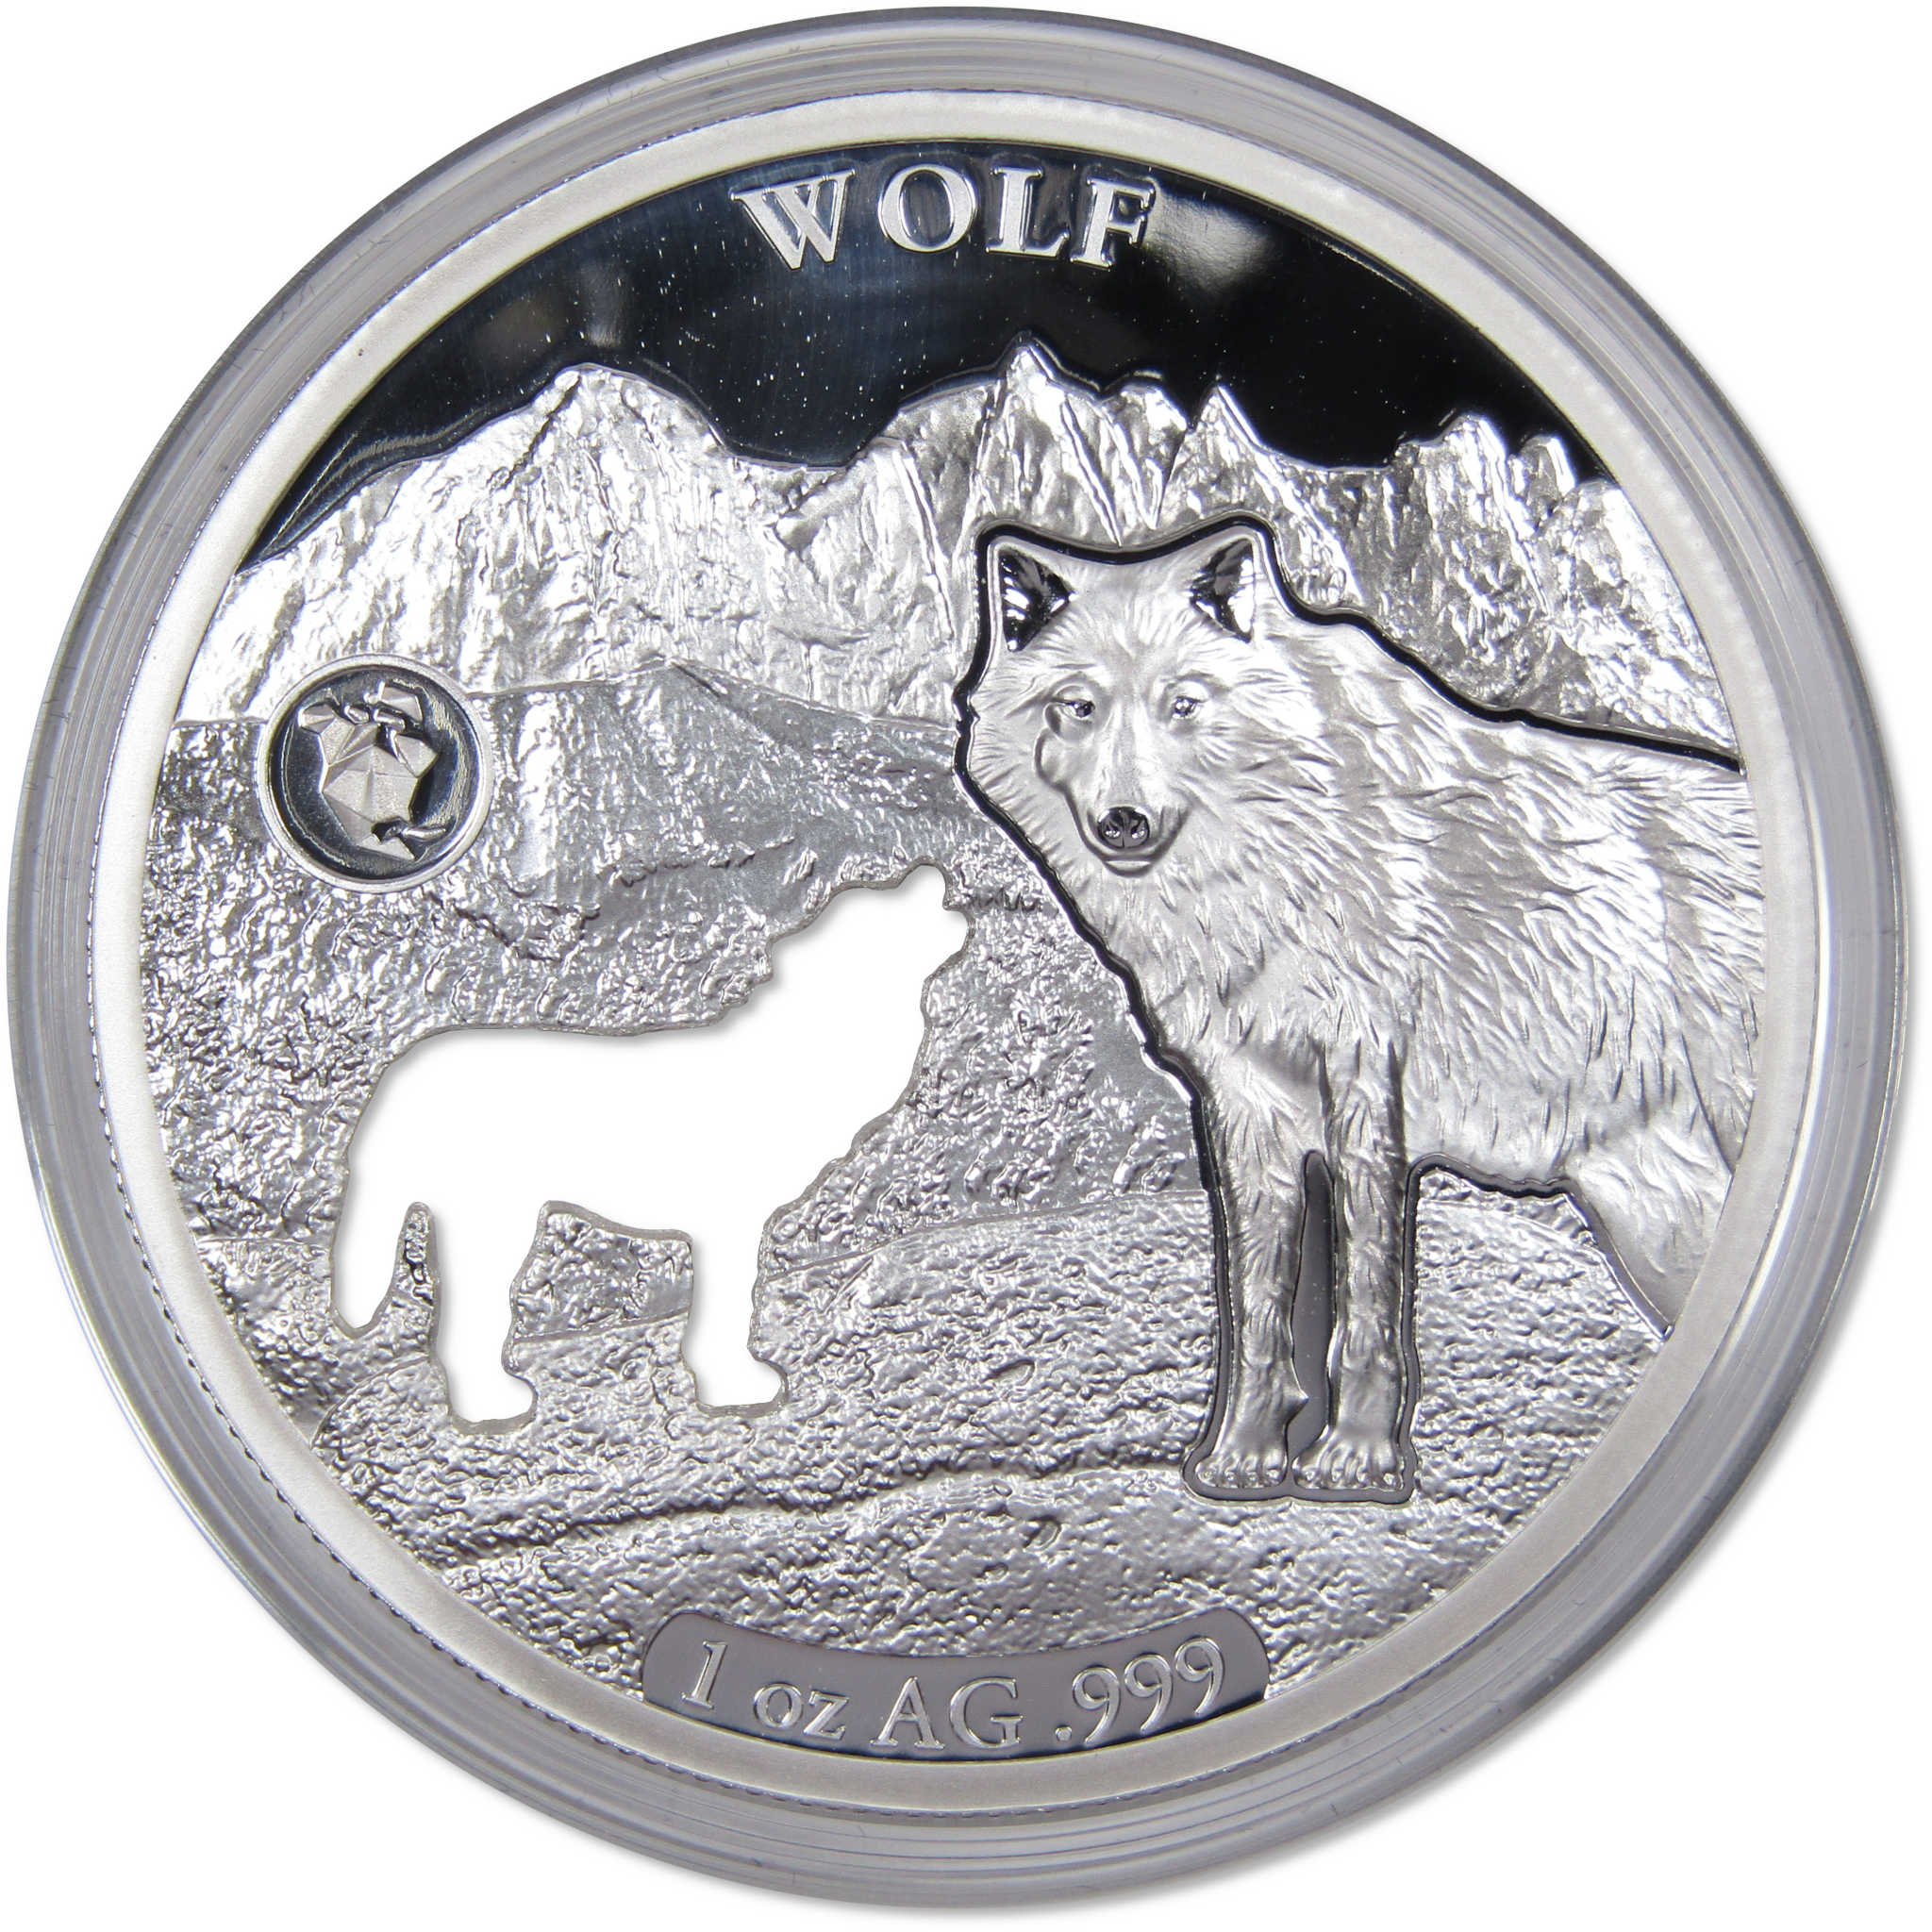 Shapes of America Wolf 1 oz .999 Fine Silver $5 Proof-Like Coin Barbados COA